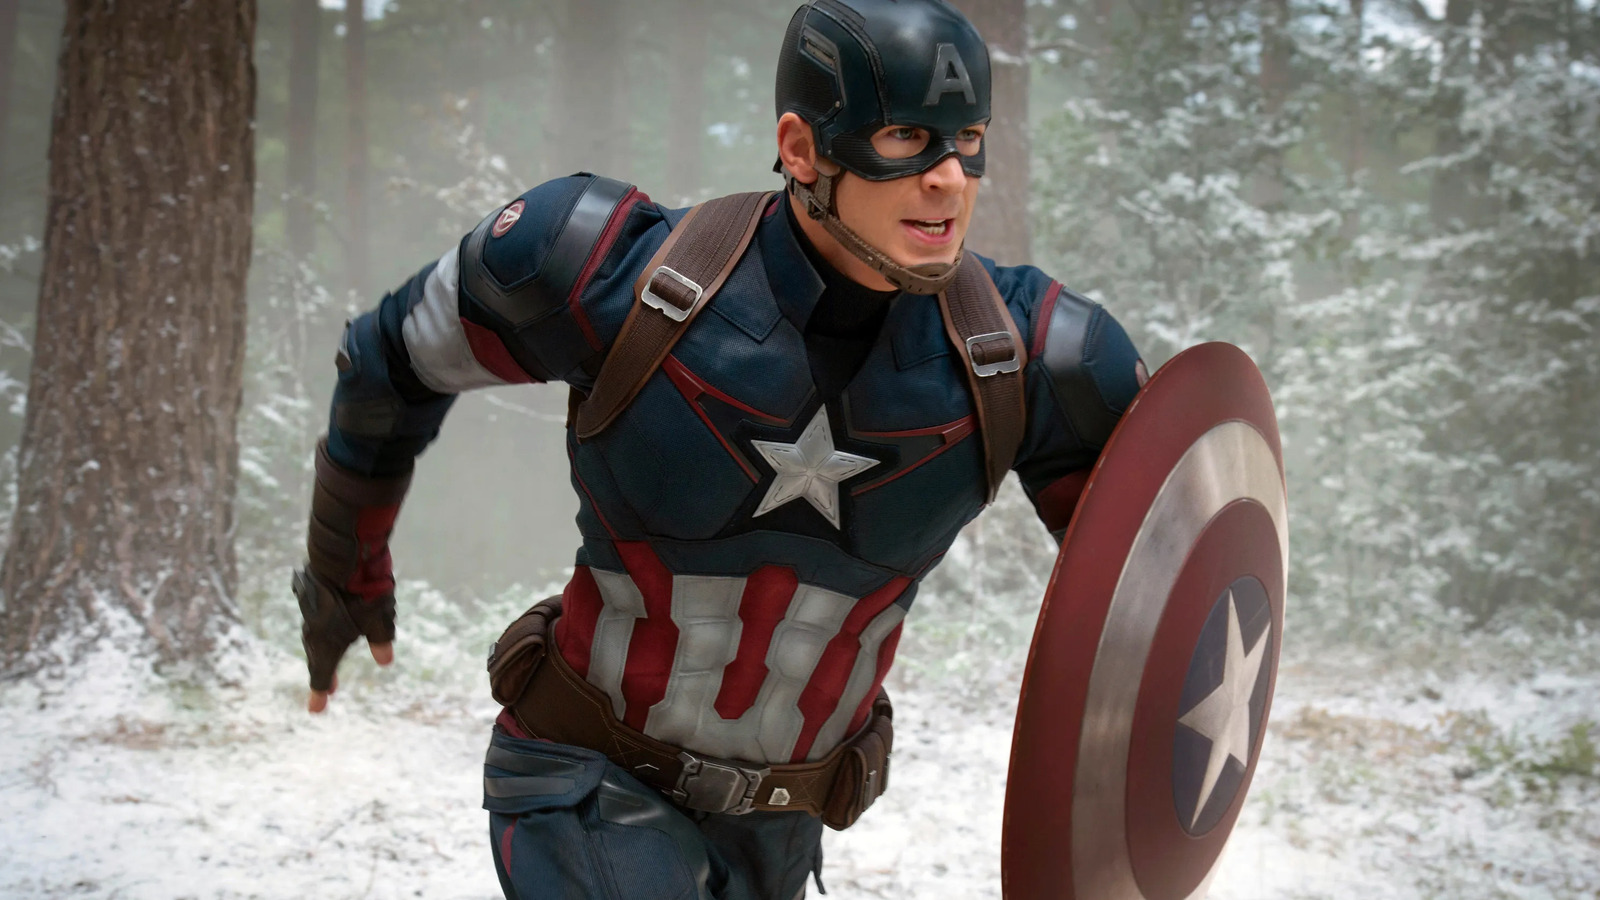 Kevin Feige starred Chris Evans as Captain America thanks to two pop culture icons